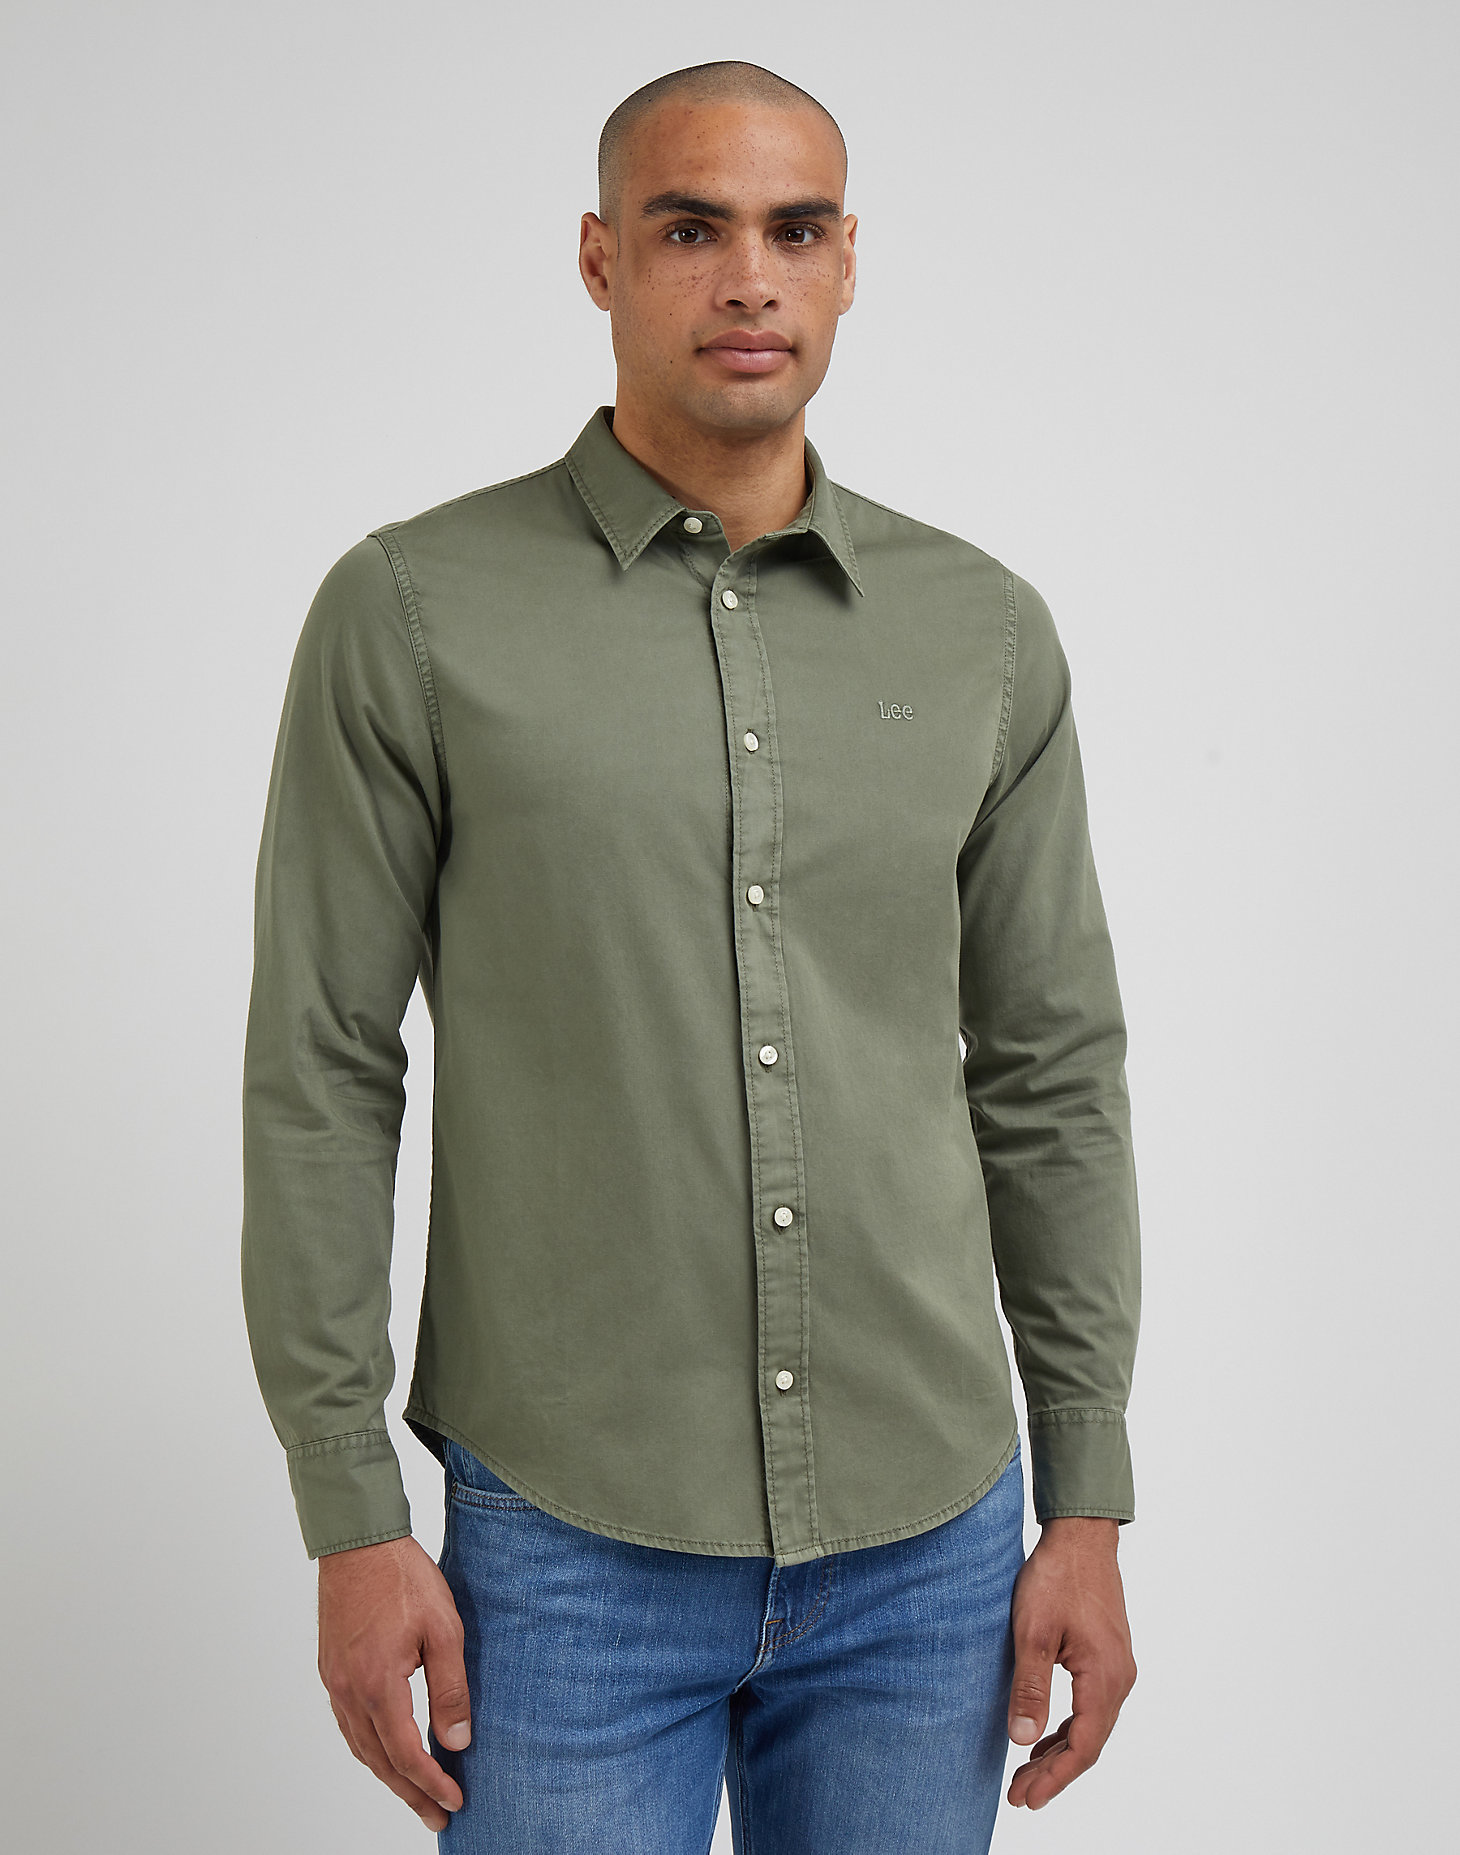 Patch Shirt in Olive Grove main view